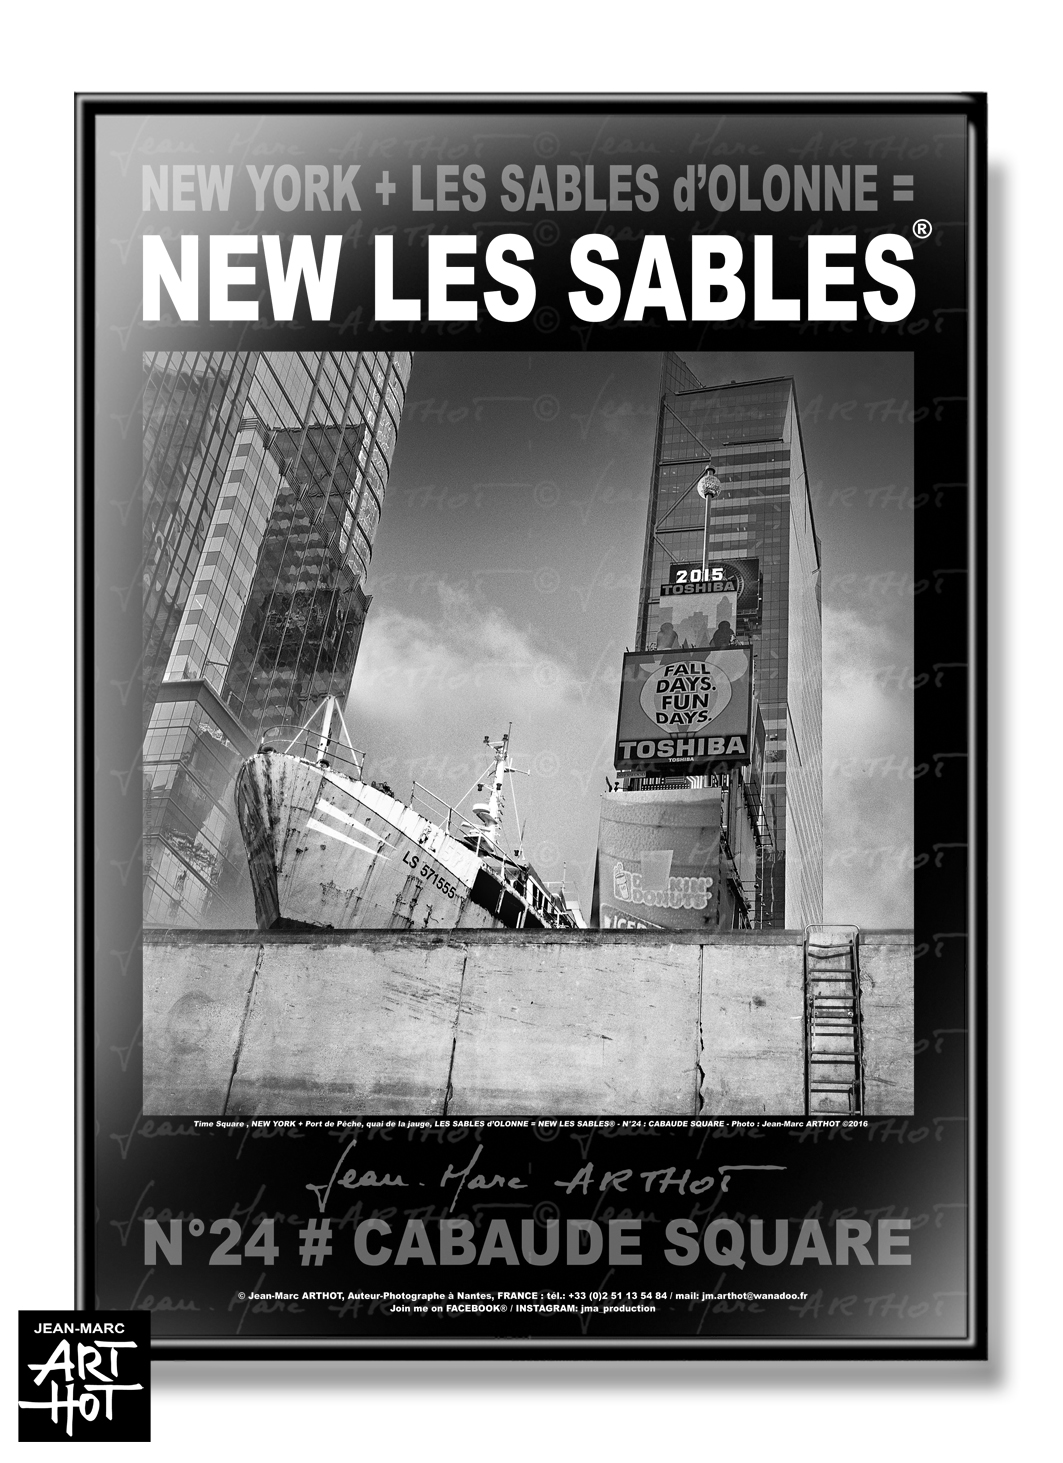 arthot-photo-art-b&amp;w-new-york-vendee-sables-olonne-newlessables-024-times-square-AFFICHE